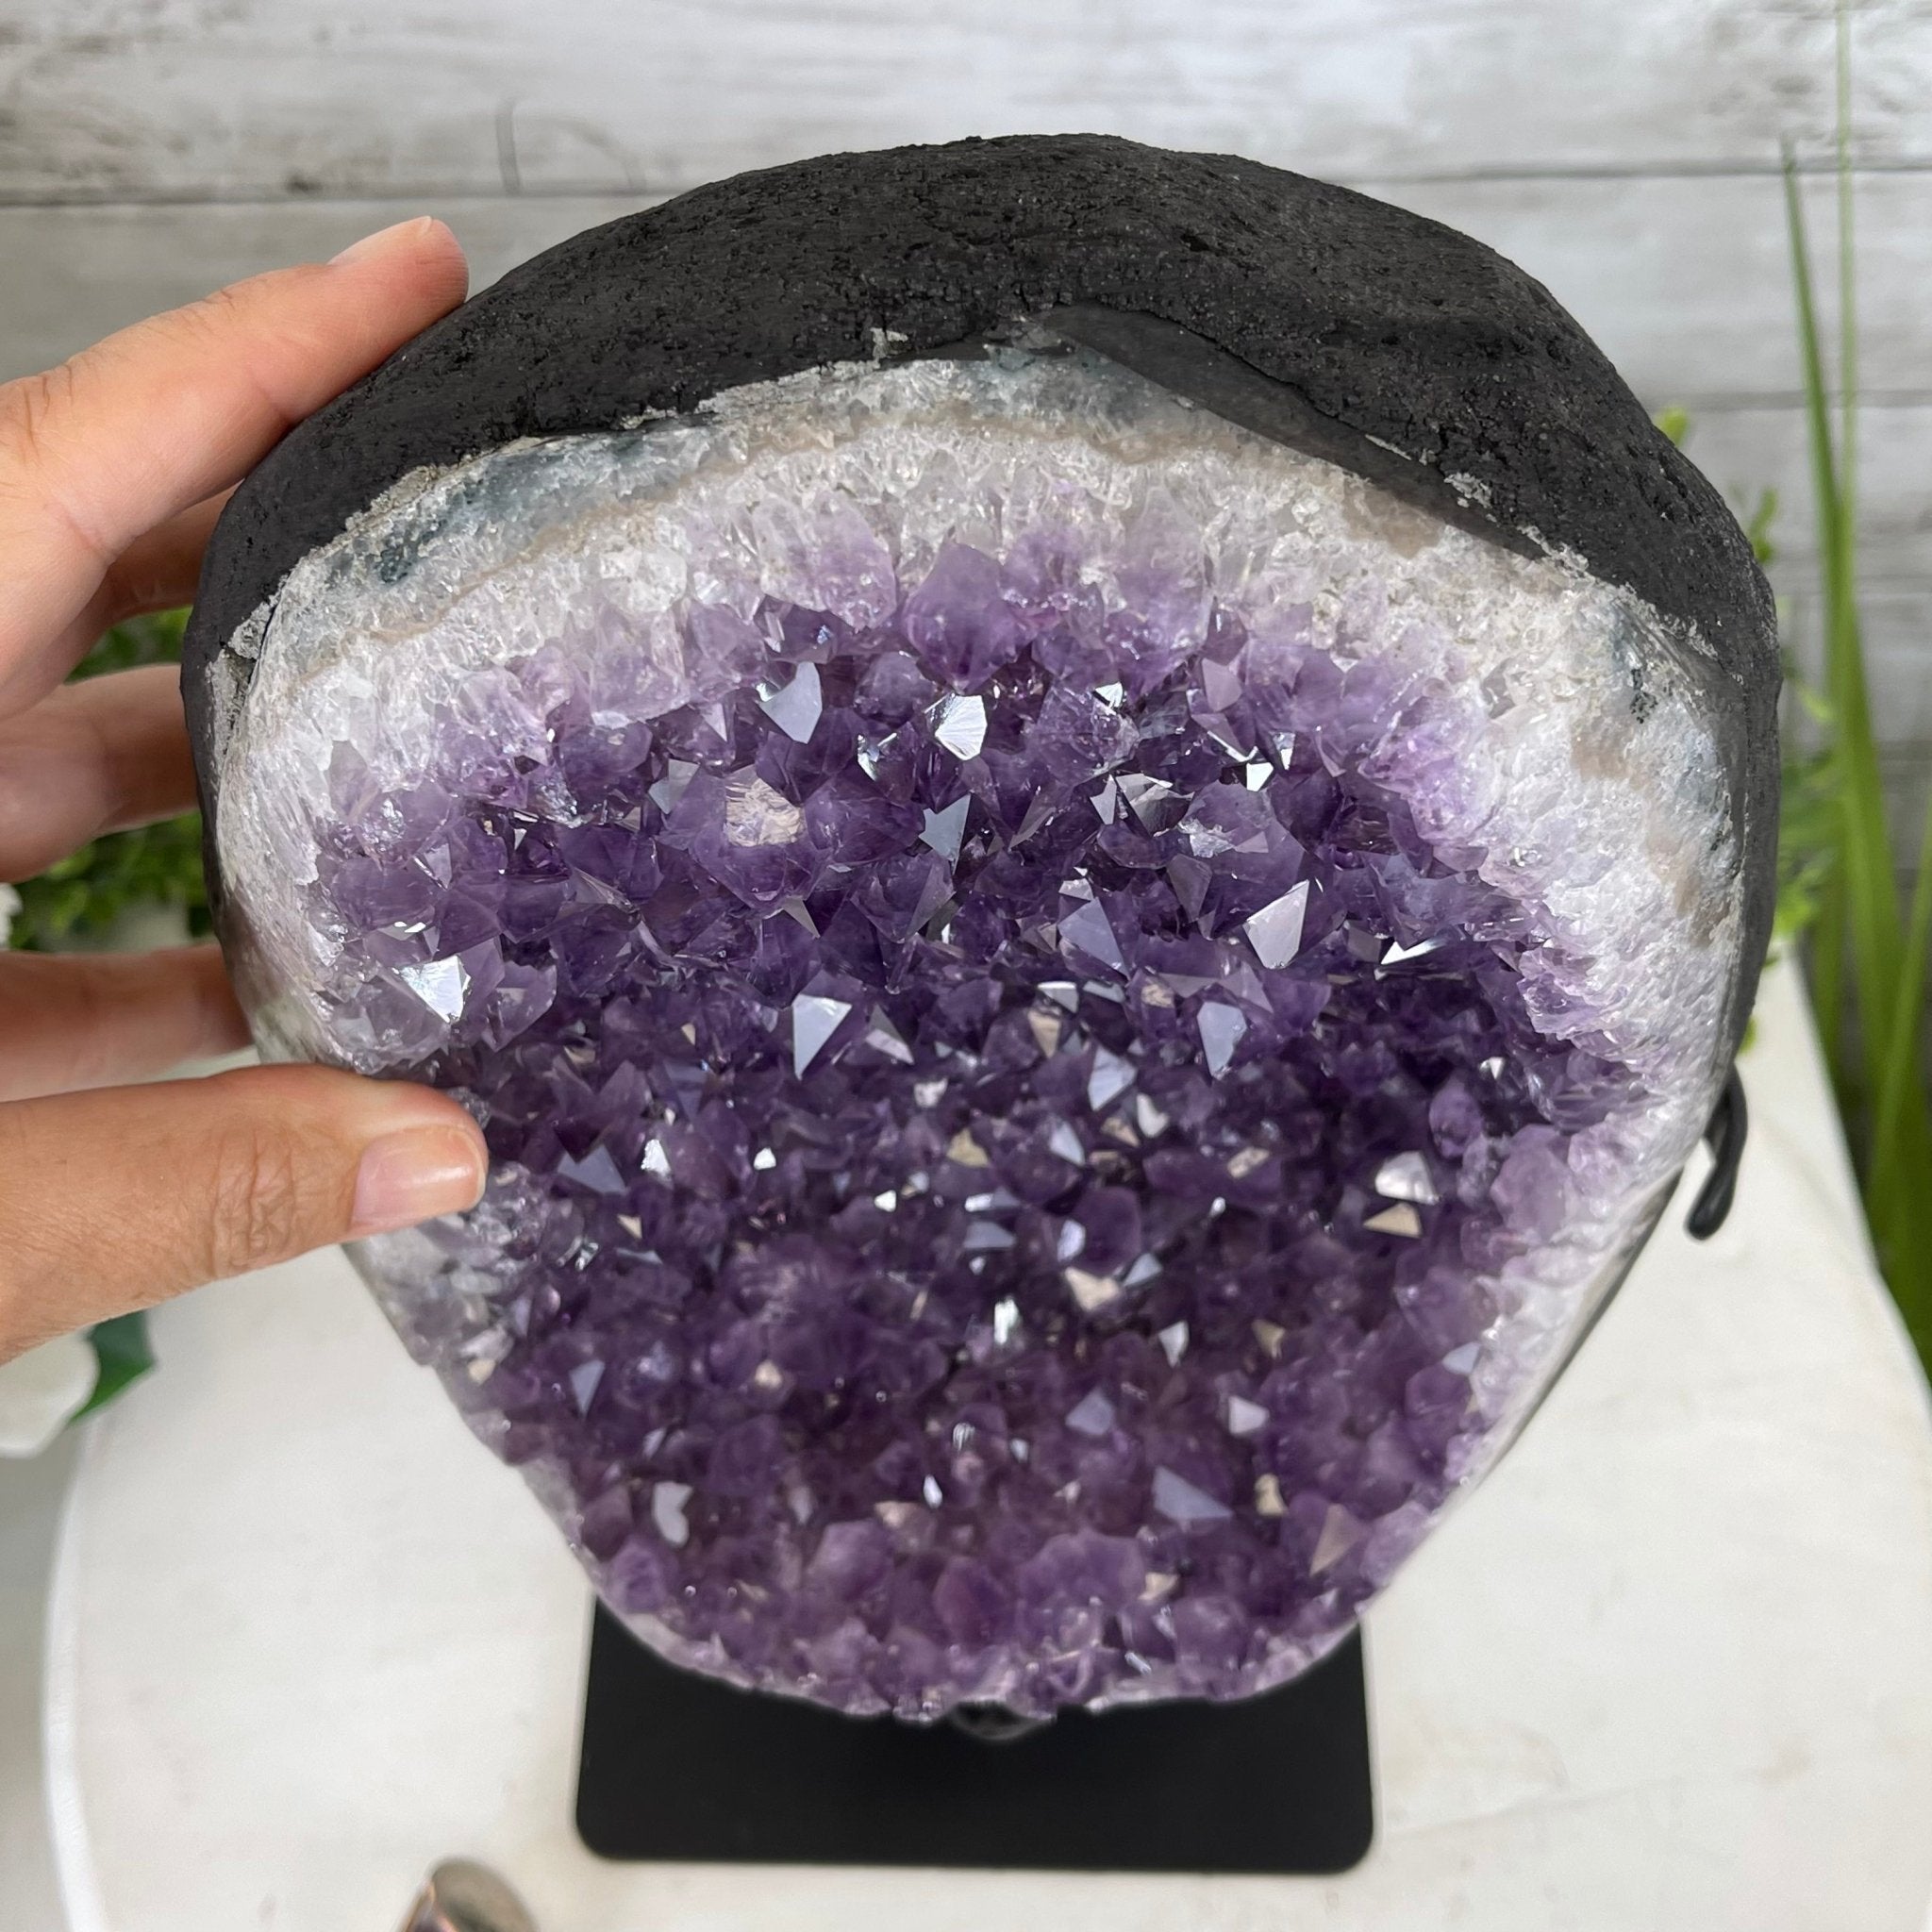 Extra Plus Quality Amethyst Druse Cluster on Metal Stand, 16.7 lbs & 12.9" tall #5491-0040 by Brazil Gems - Brazil GemsBrazil GemsExtra Plus Quality Amethyst Druse Cluster on Metal Stand, 16.7 lbs & 12.9" tall #5491-0040 by Brazil GemsClusters on Fixed Bases5491-0040